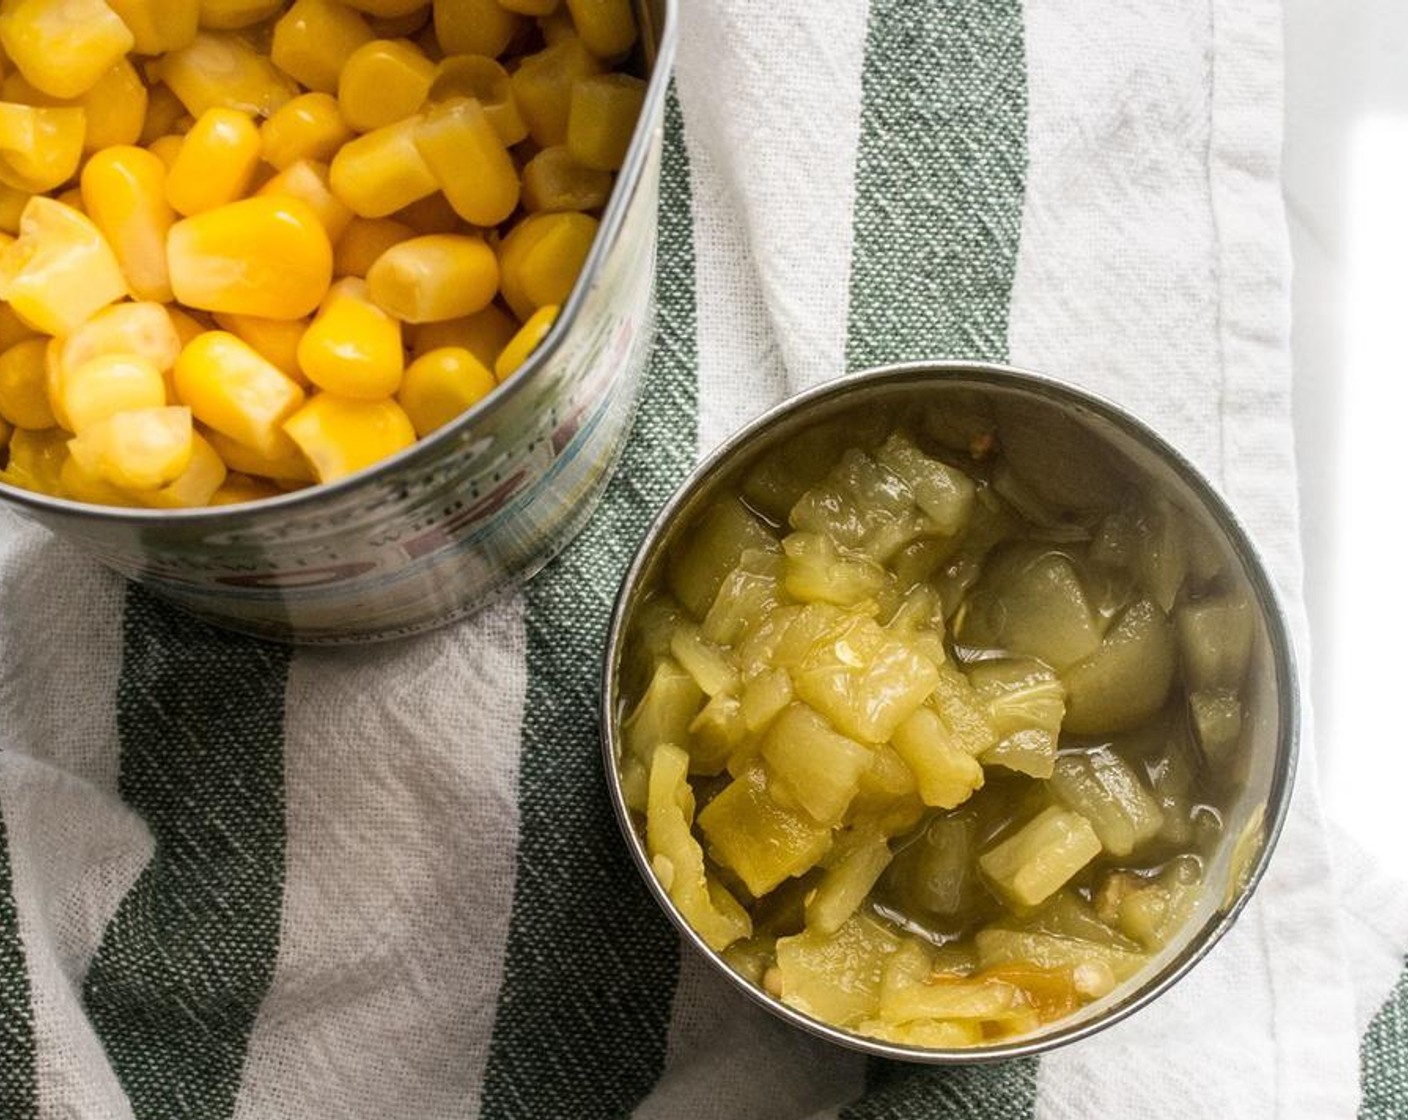 step 3 Once the zucchini and squash are cooked, stir in Whole Kernel Corn (1 can), Mild Diced Green Chiles (1 can), Salt (1 tsp) and Ground Black Pepper (3/4 tsp) and cook 2-3 minutes or until corn is heated through.